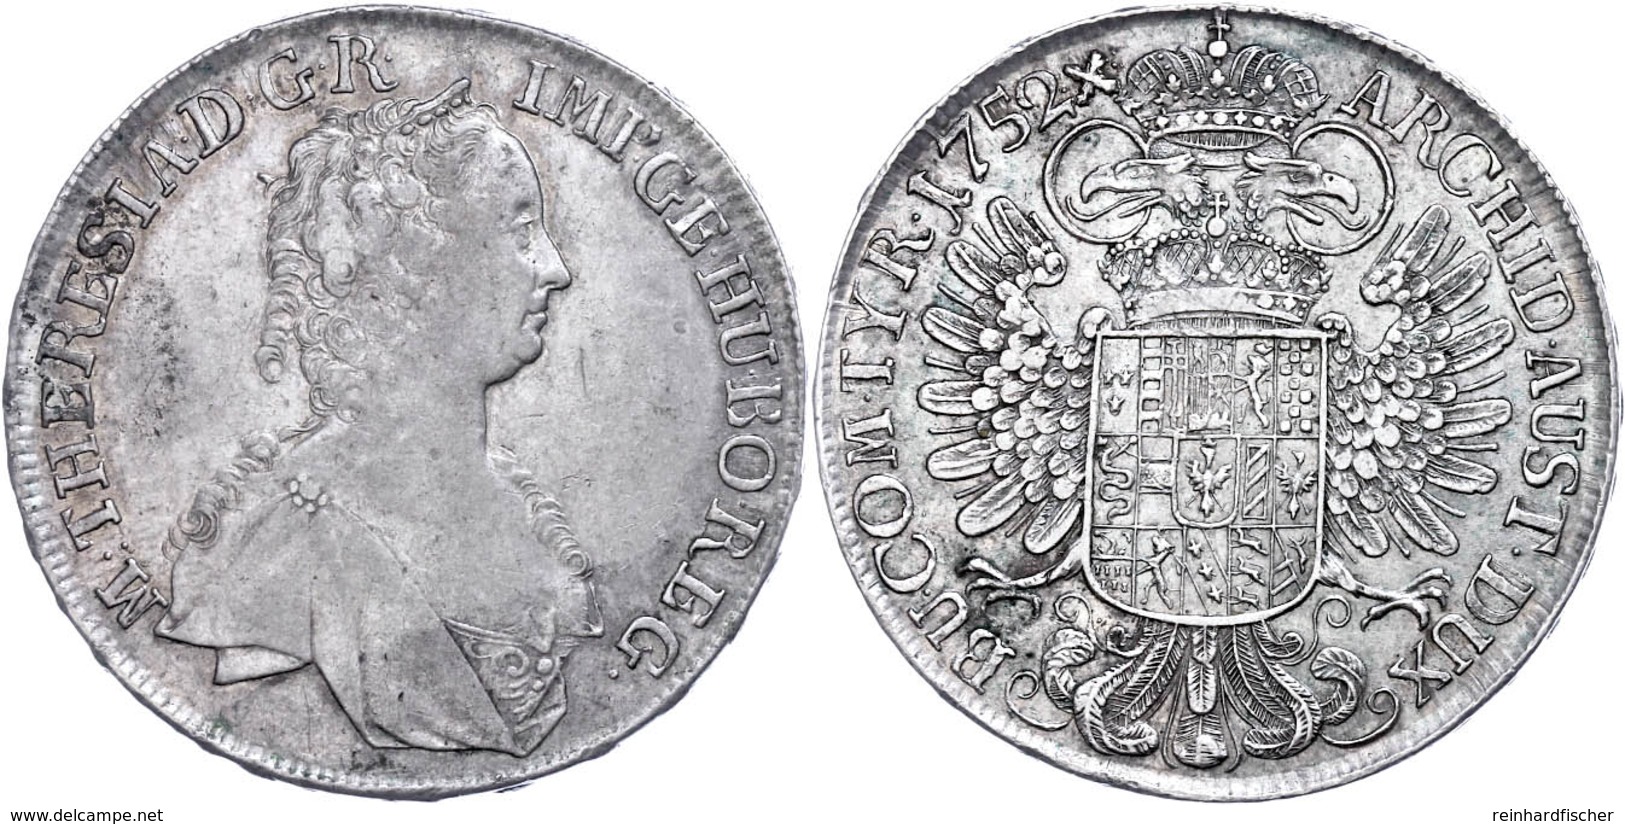 Taler, 1752, Maria Theresia, Hall, Eypeltauer 79, Ss+. - Oesterreich